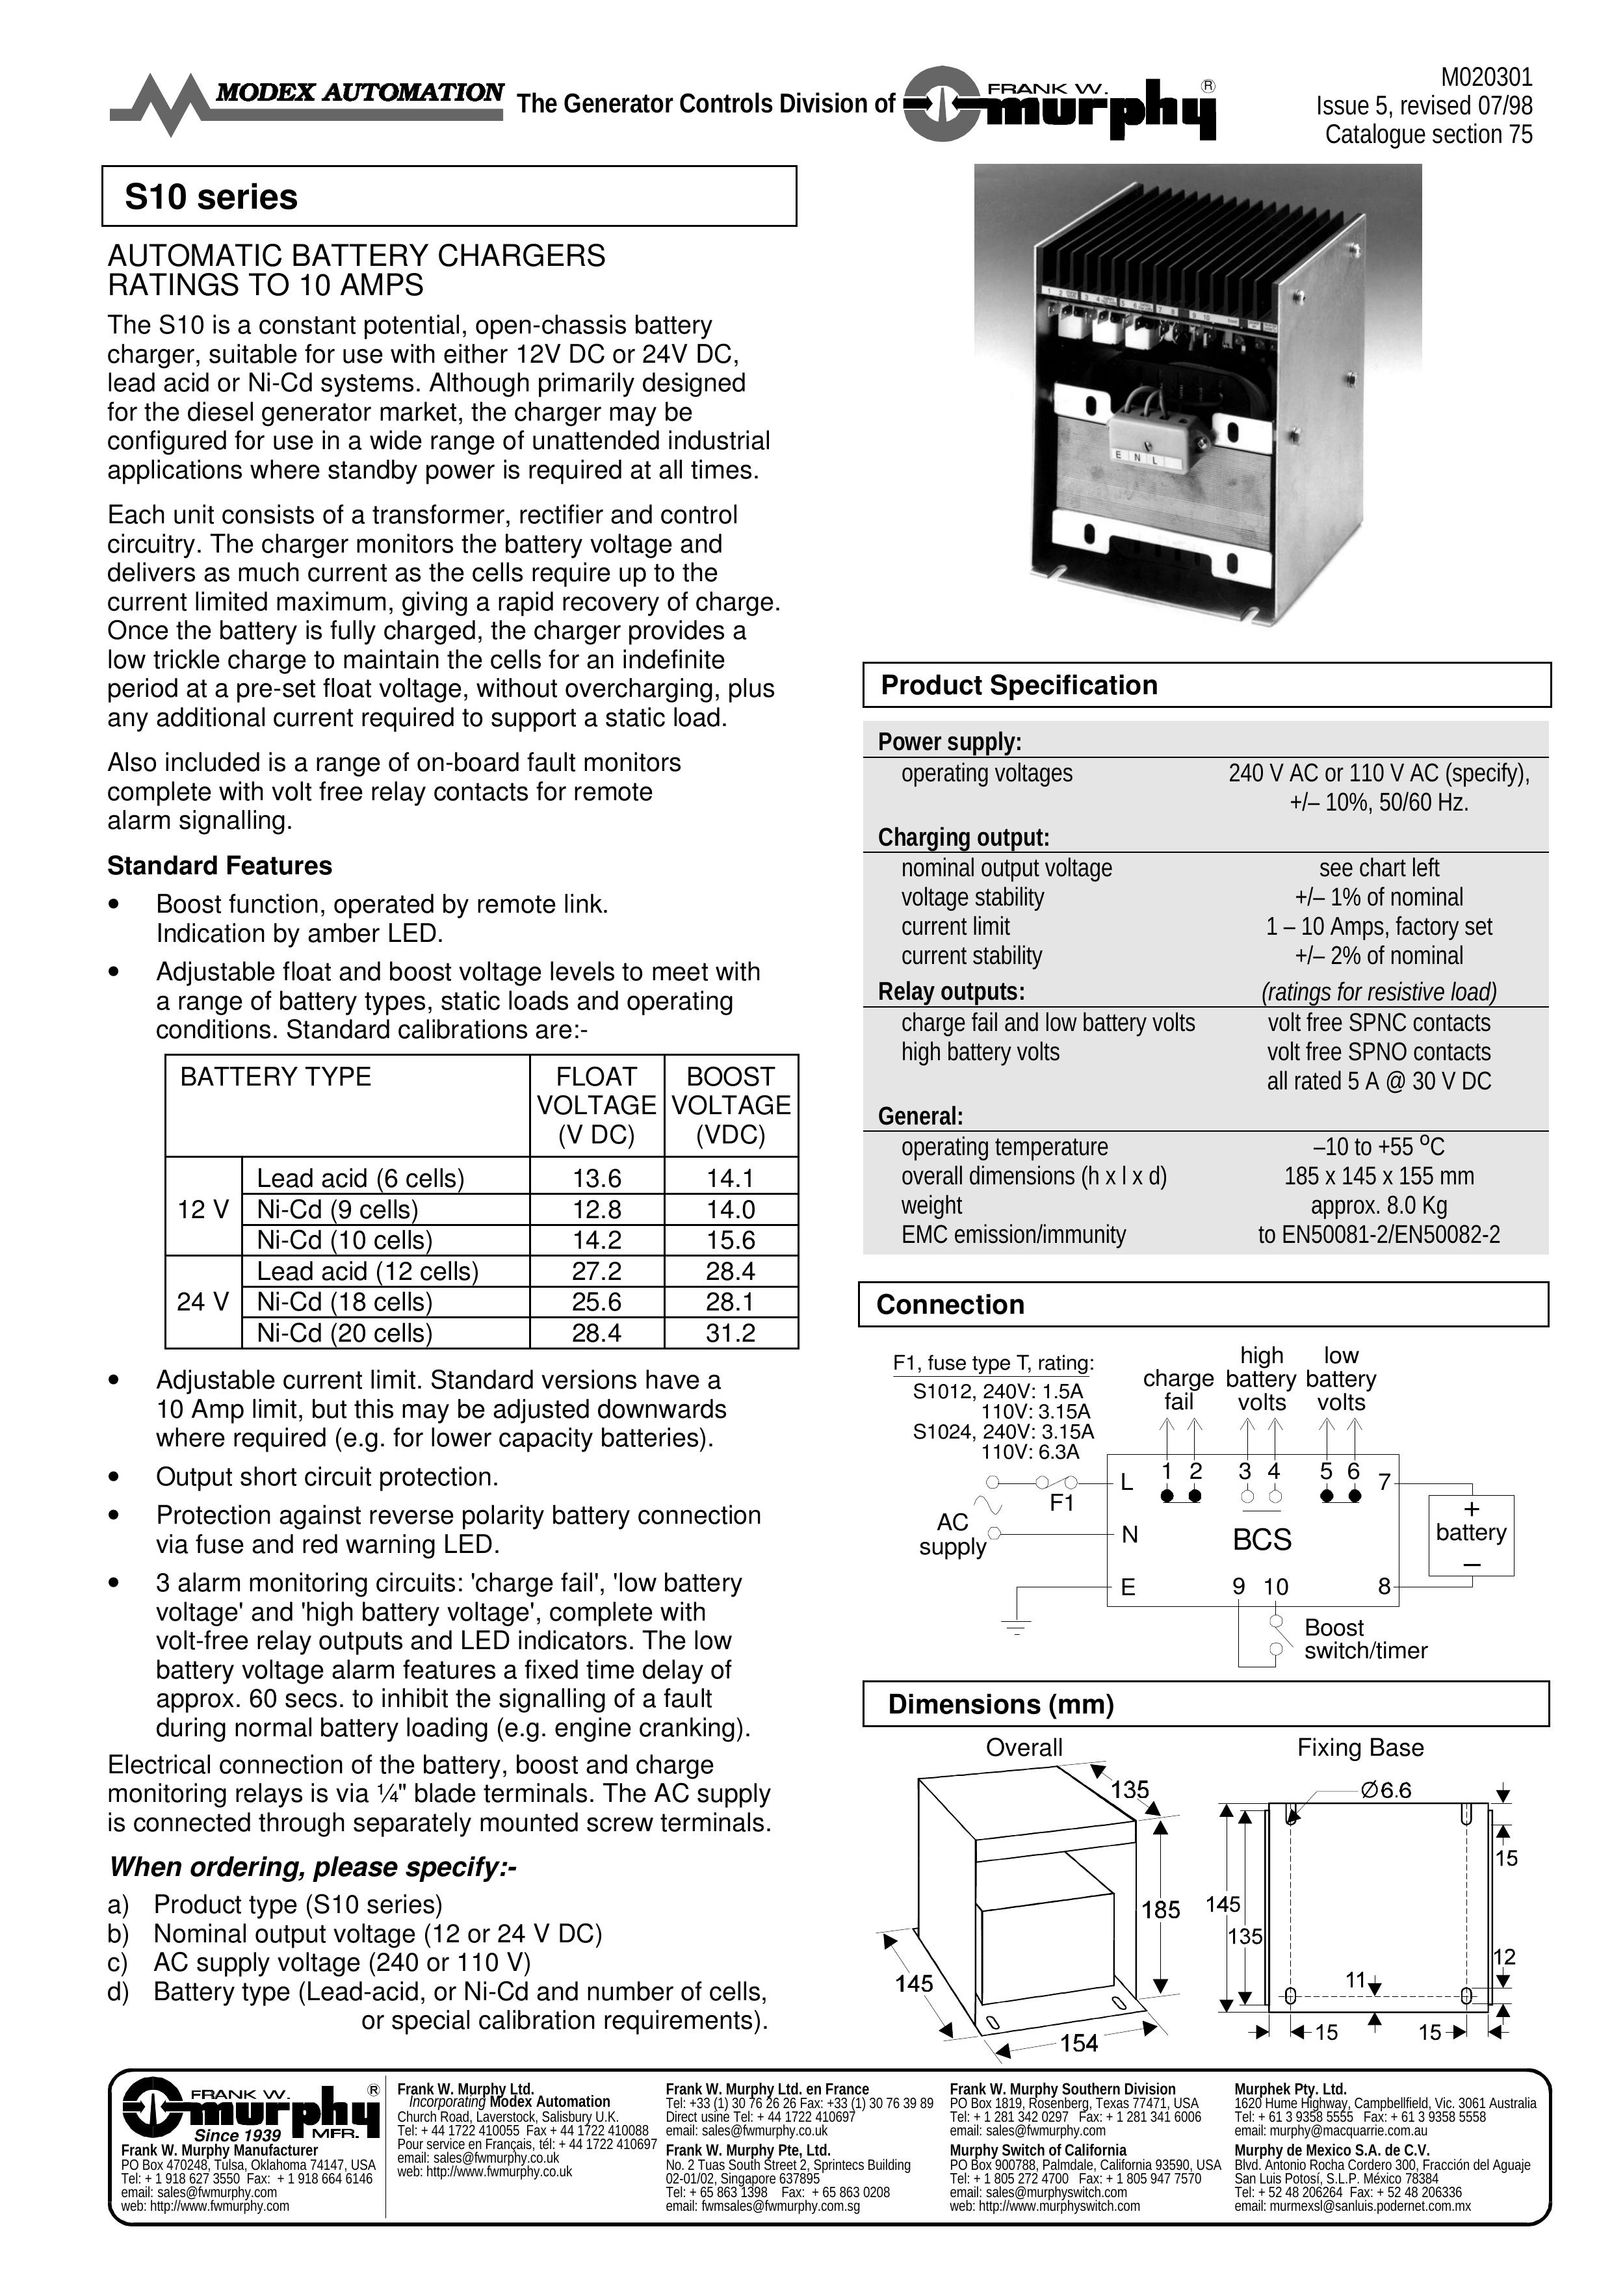 Murphy S10 Series Battery Charger User Manual